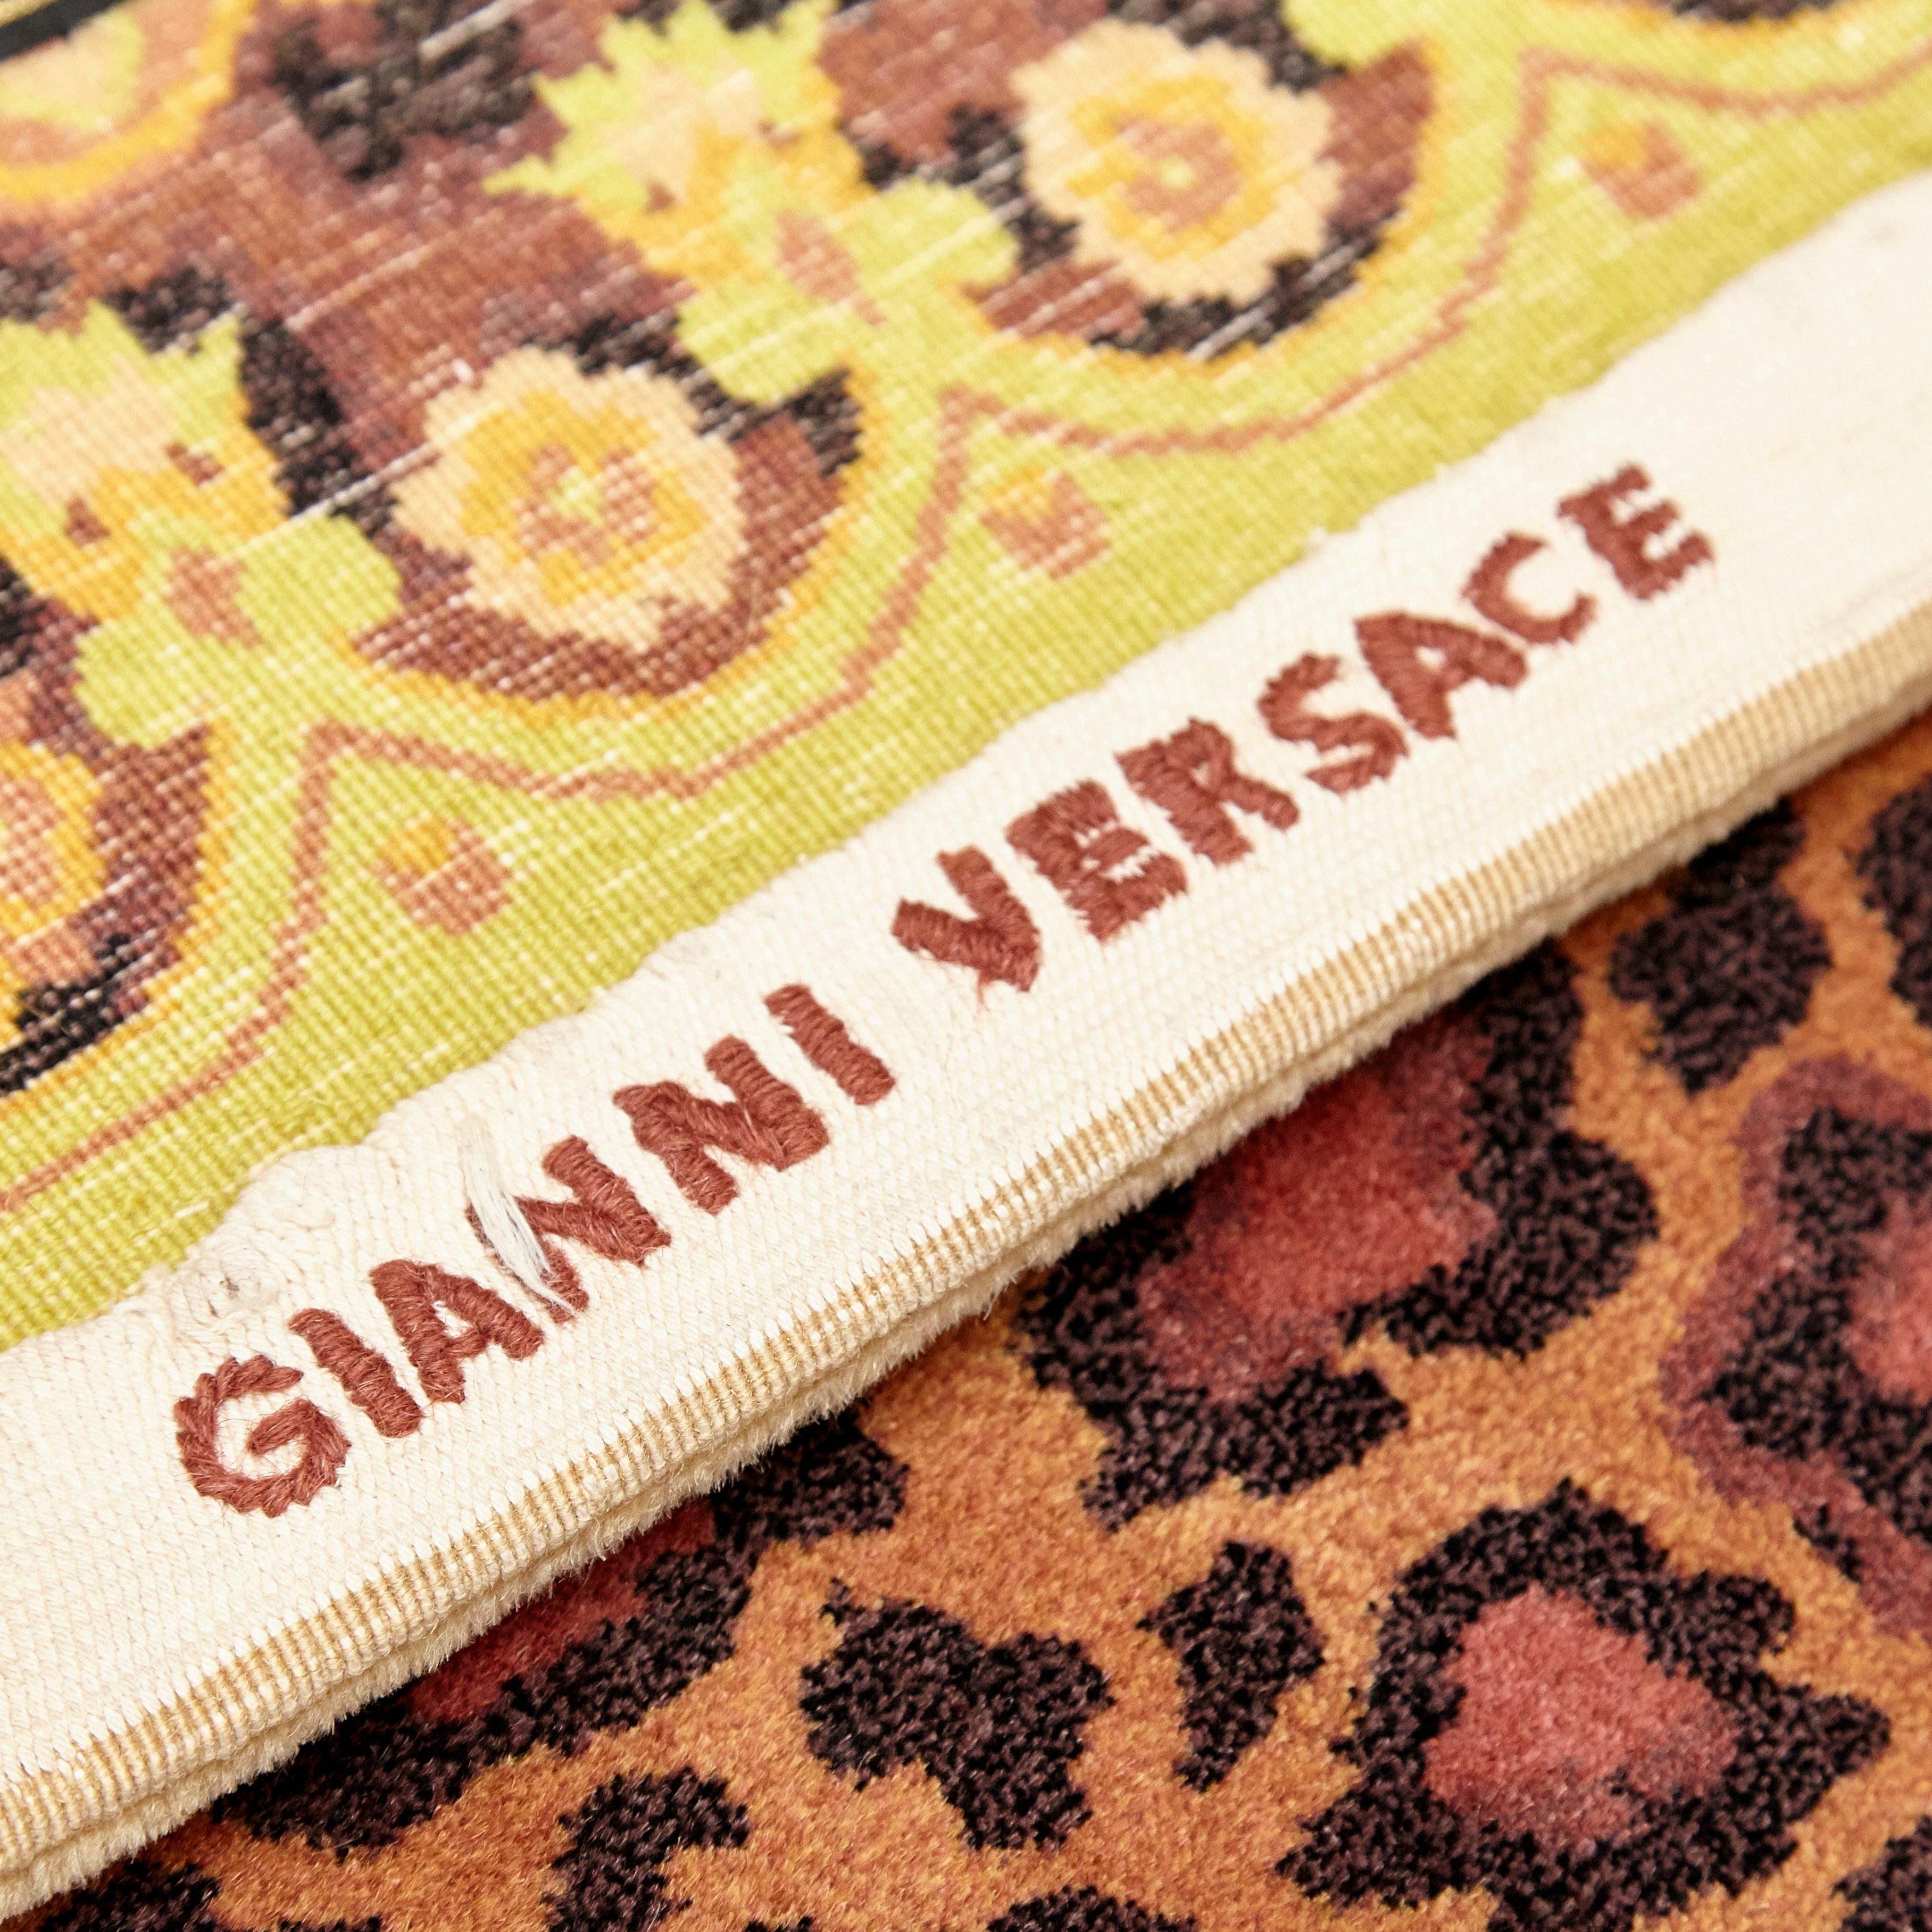 Wool Gianni Versace Collection Rug Wild Barocco, Gold Leopard Animal Print, 1980